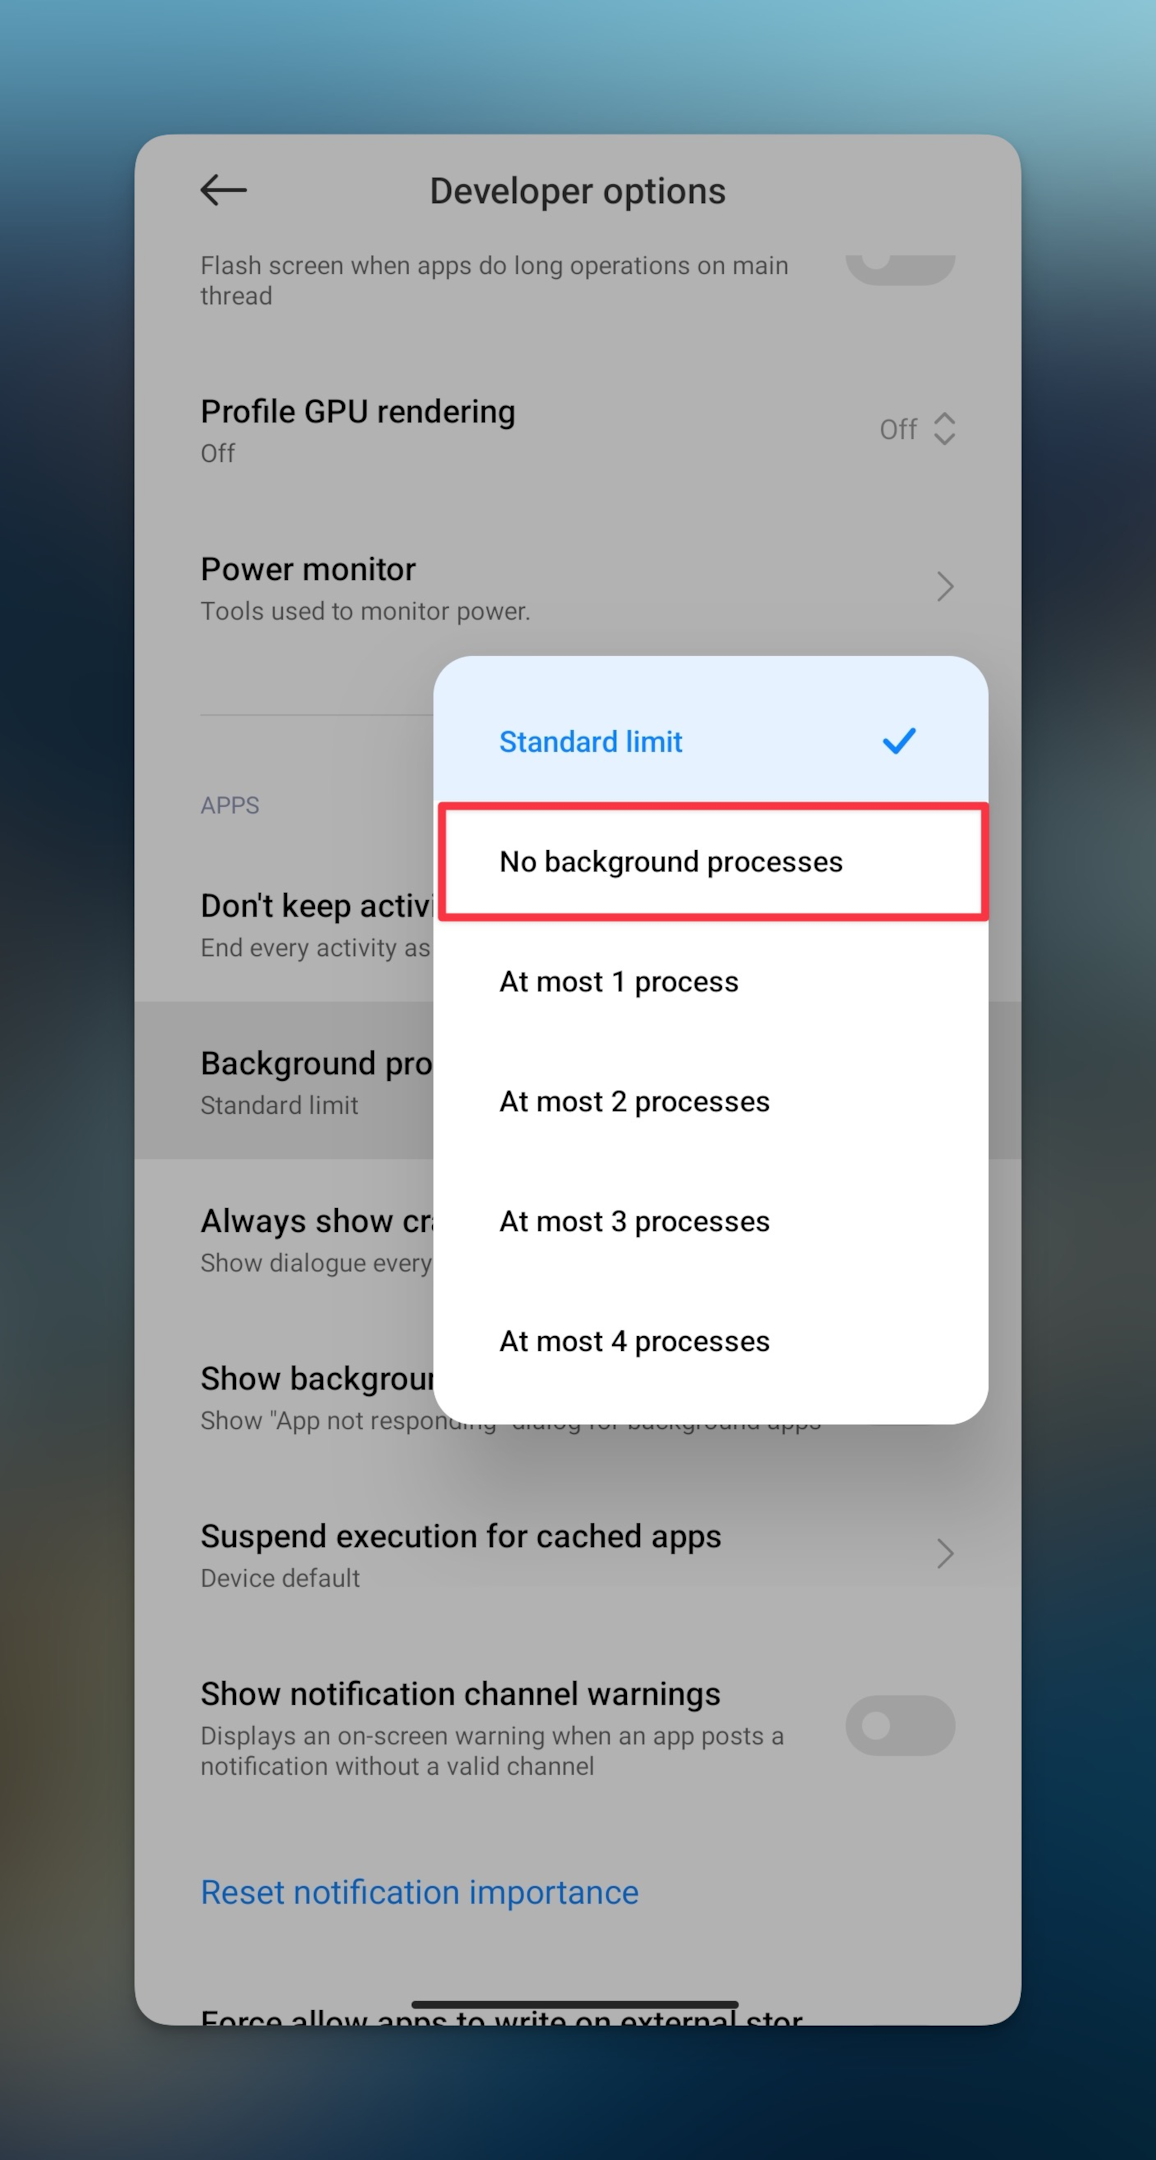 Remote.tools shows the android settings to restrict background limits for app to reduce data consumption. More data consumption might cause Instagram pictures not loading error